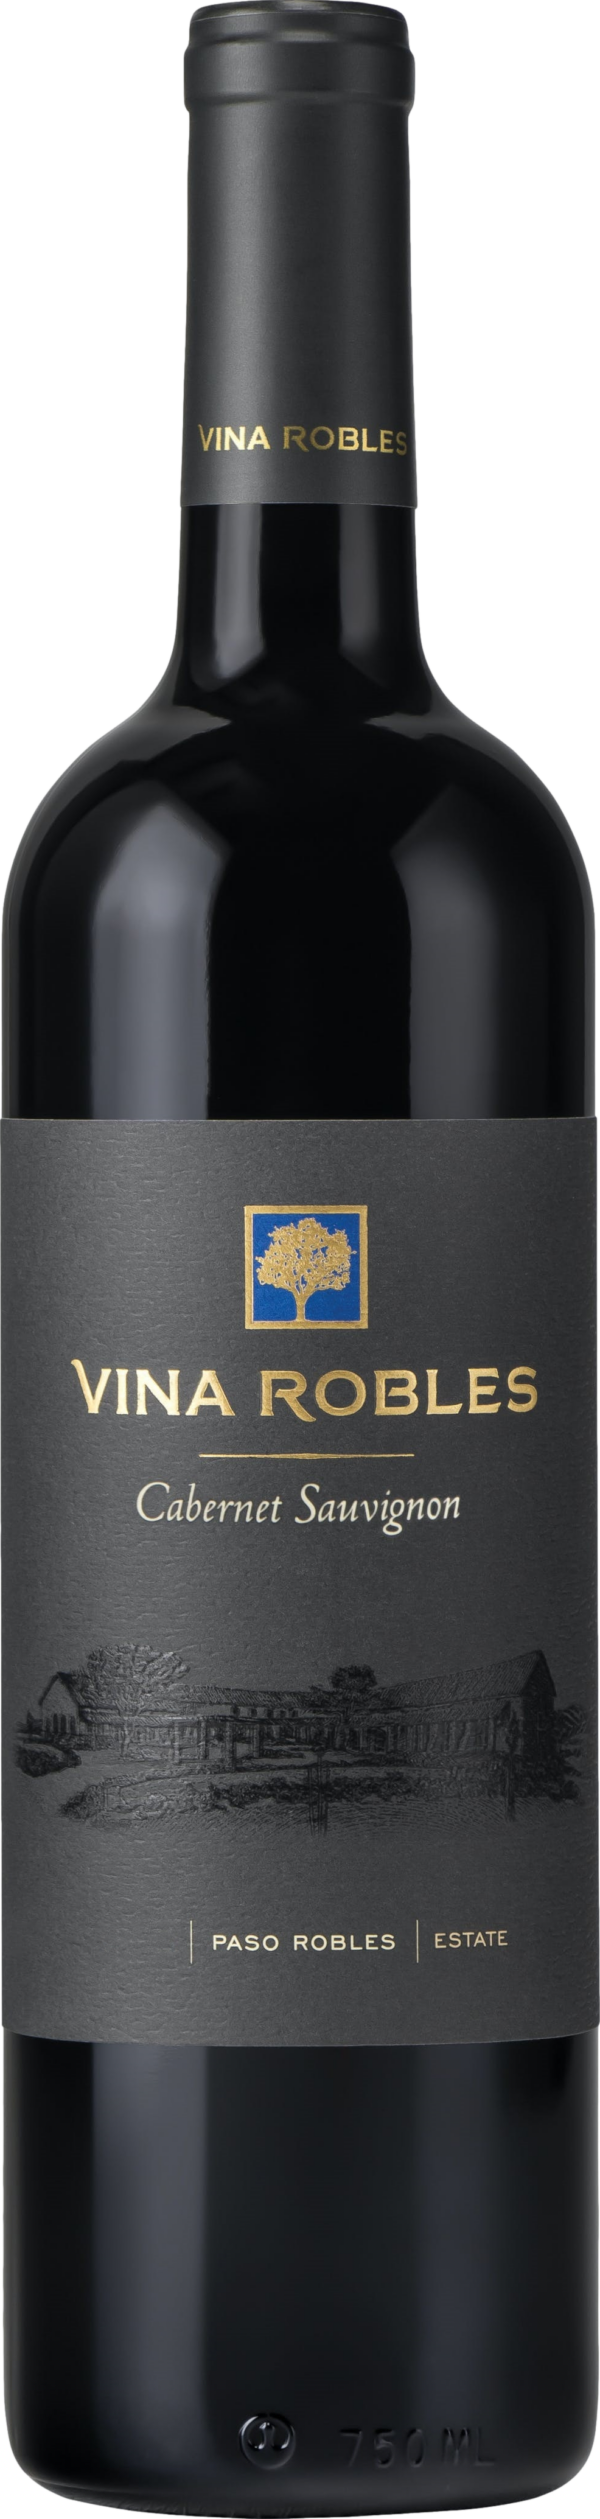 Product image of Vina Robles Cabernet Sauvignon 2019 from 8wines